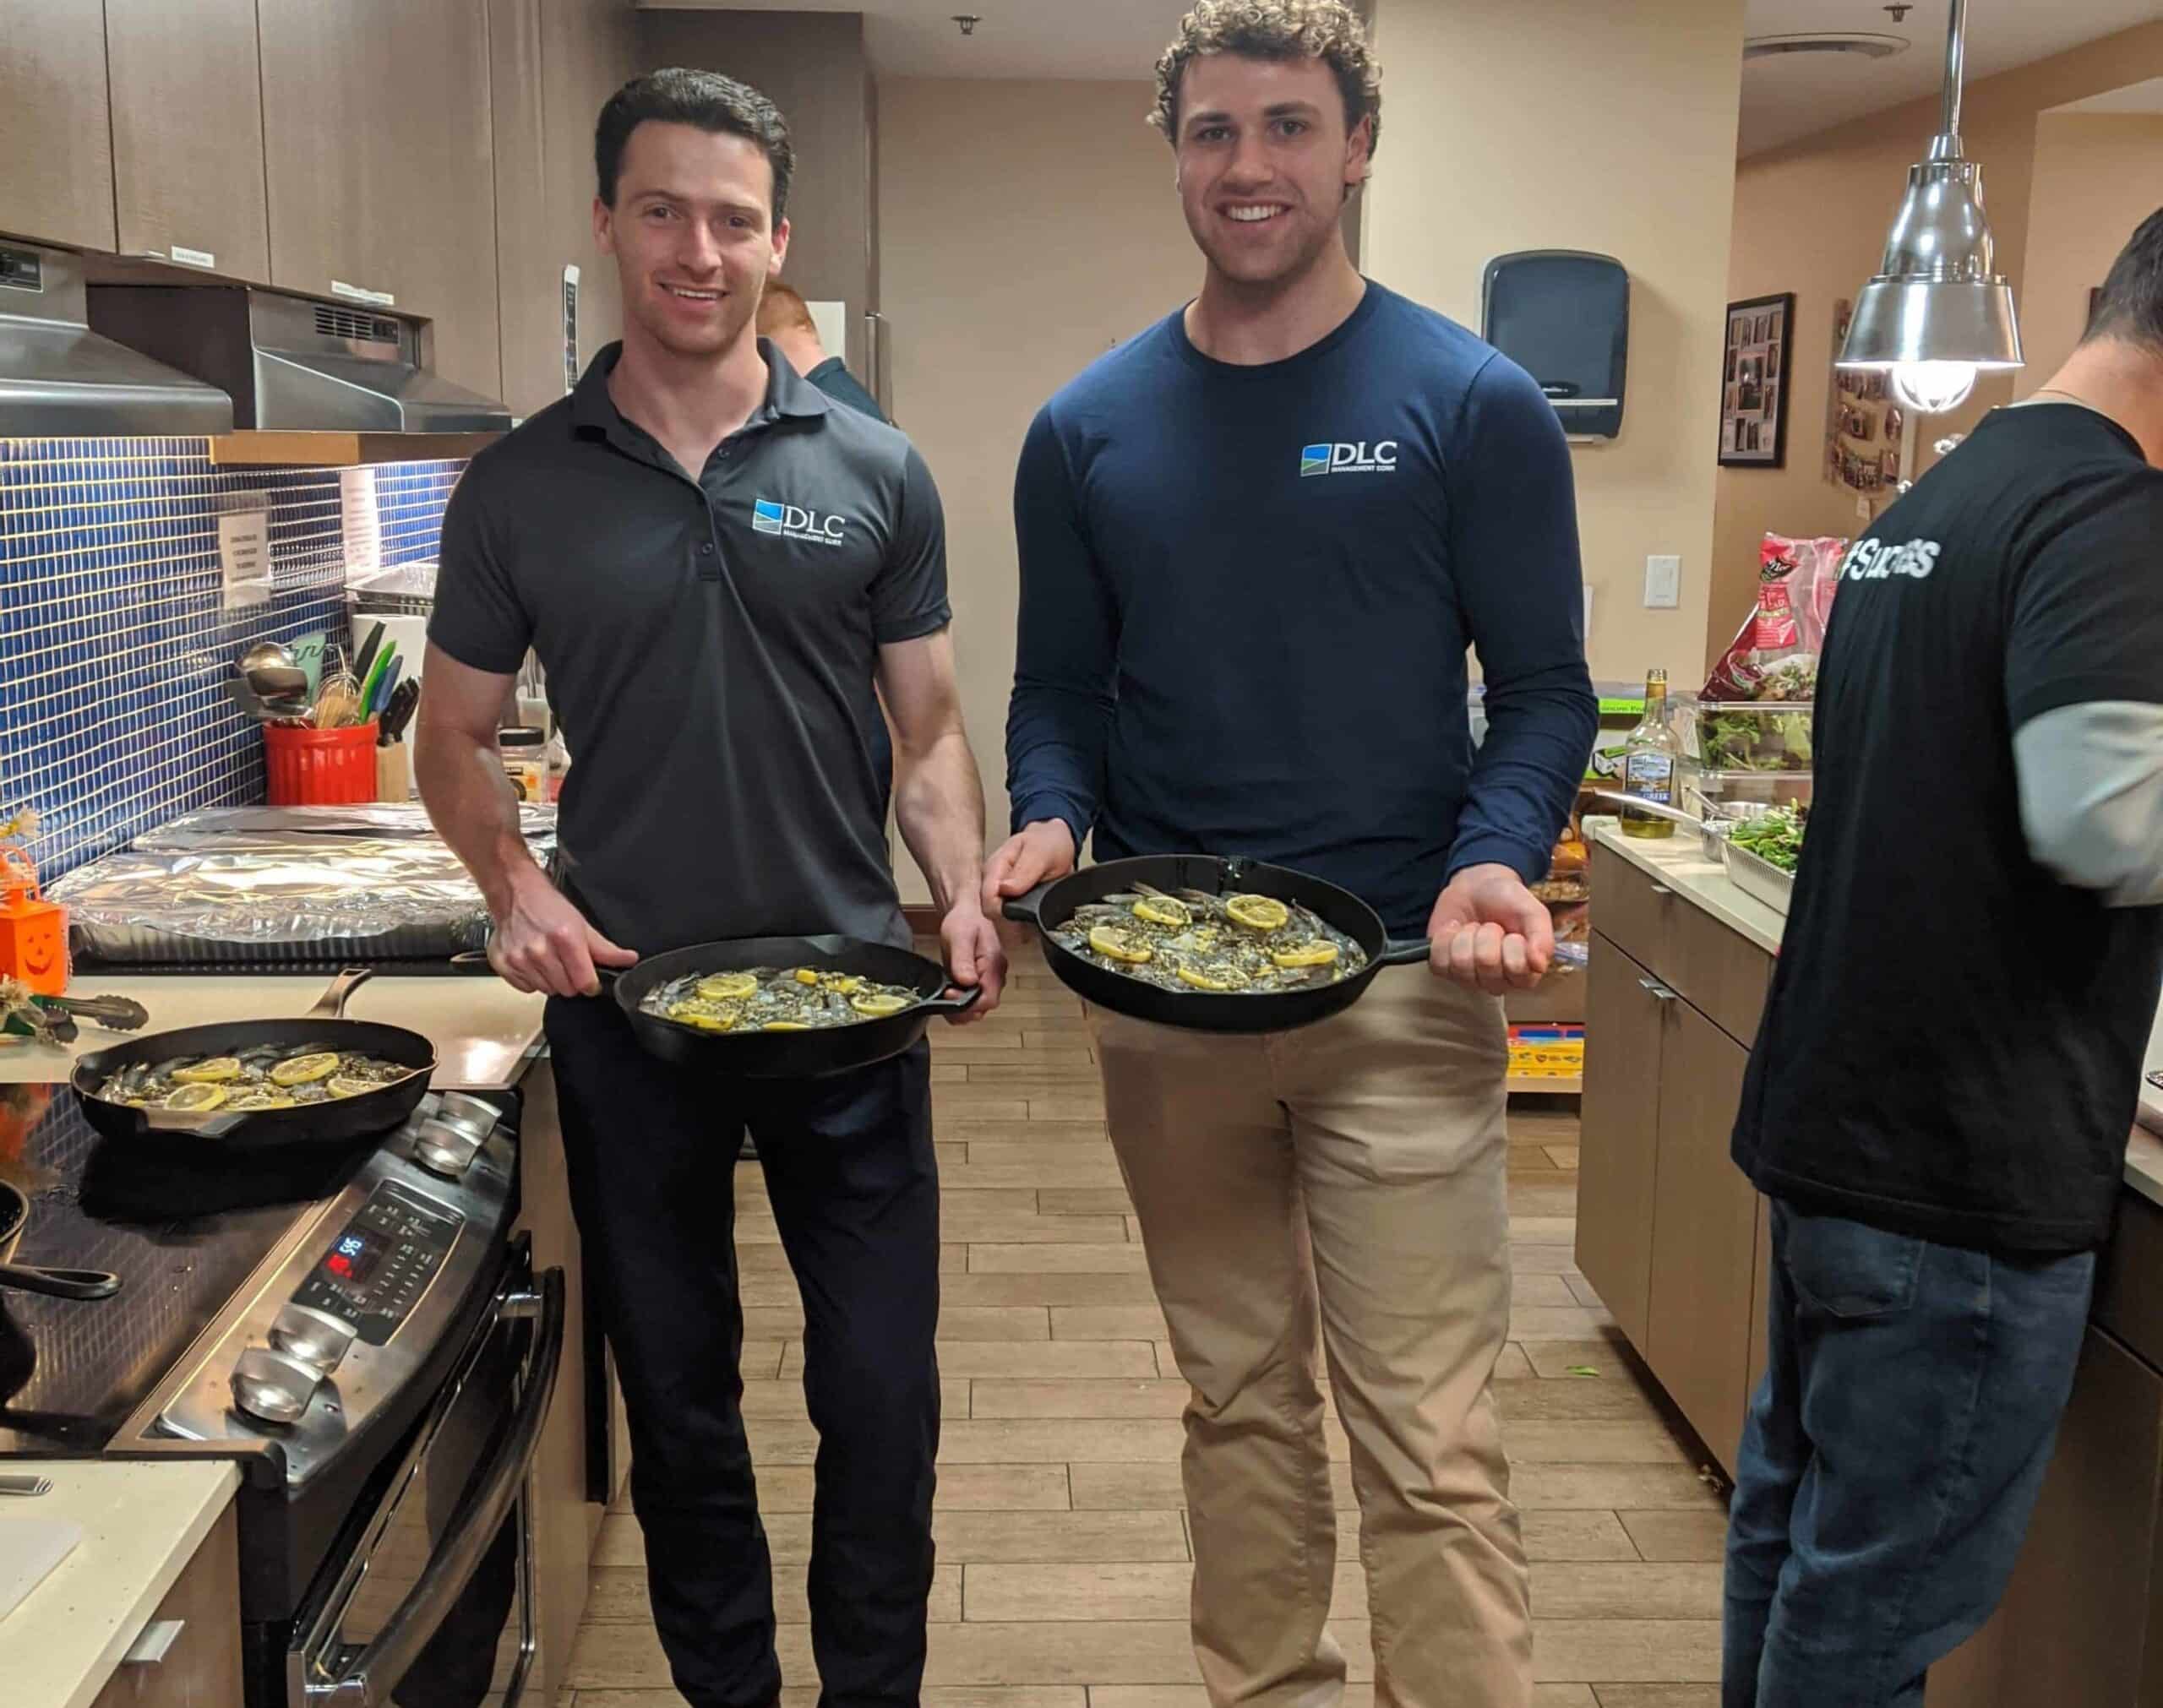 Colleagues holding pans of food at Ronald McDonald House